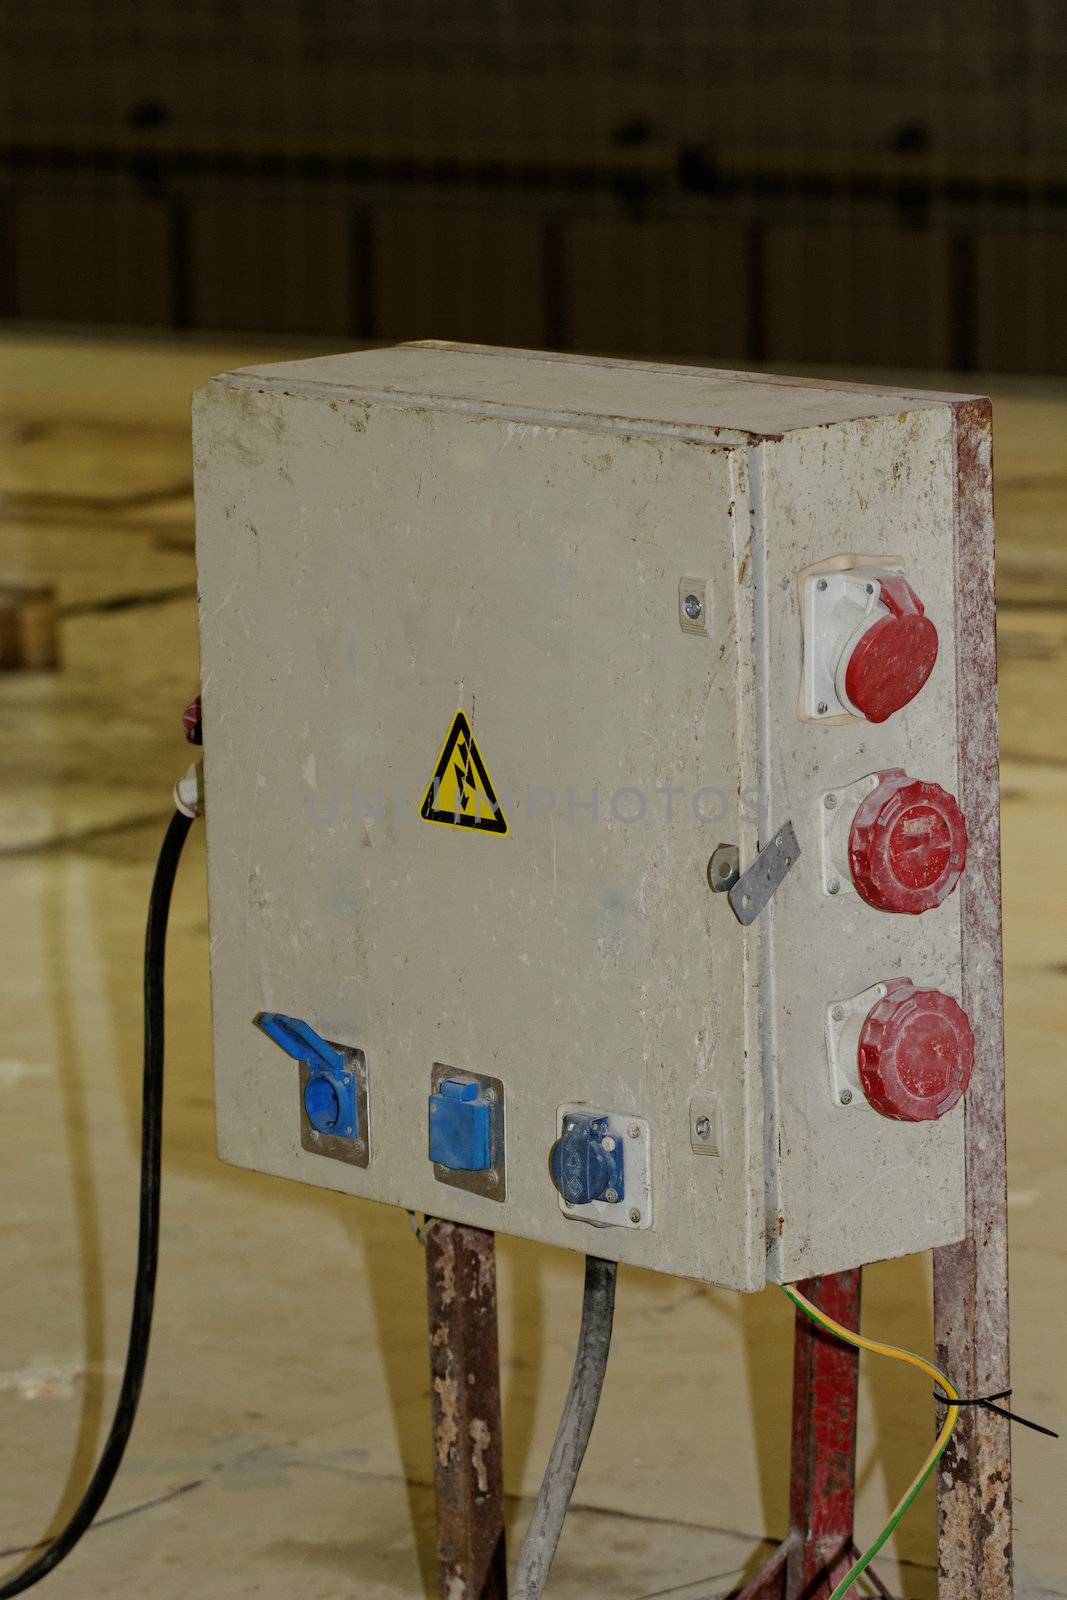 electrically distribution box in the industrial area